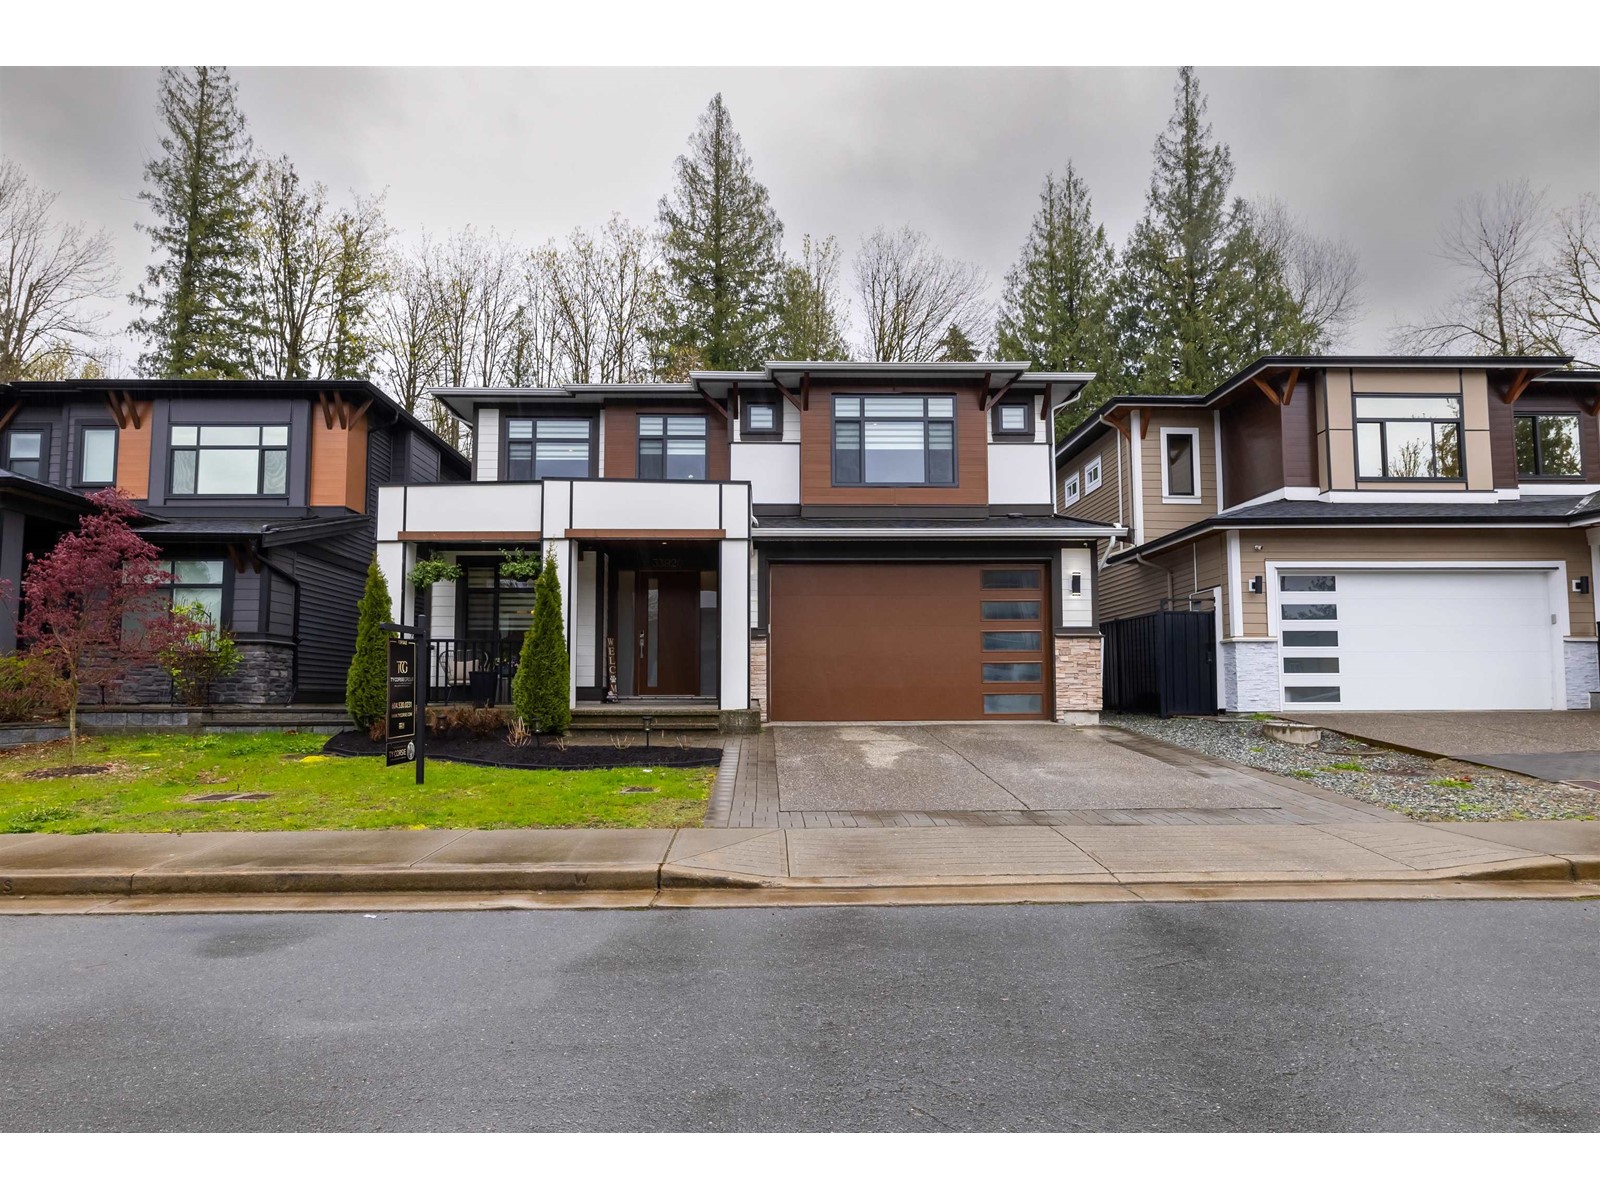 33920 TOOLEY PLACE, mission, British Columbia